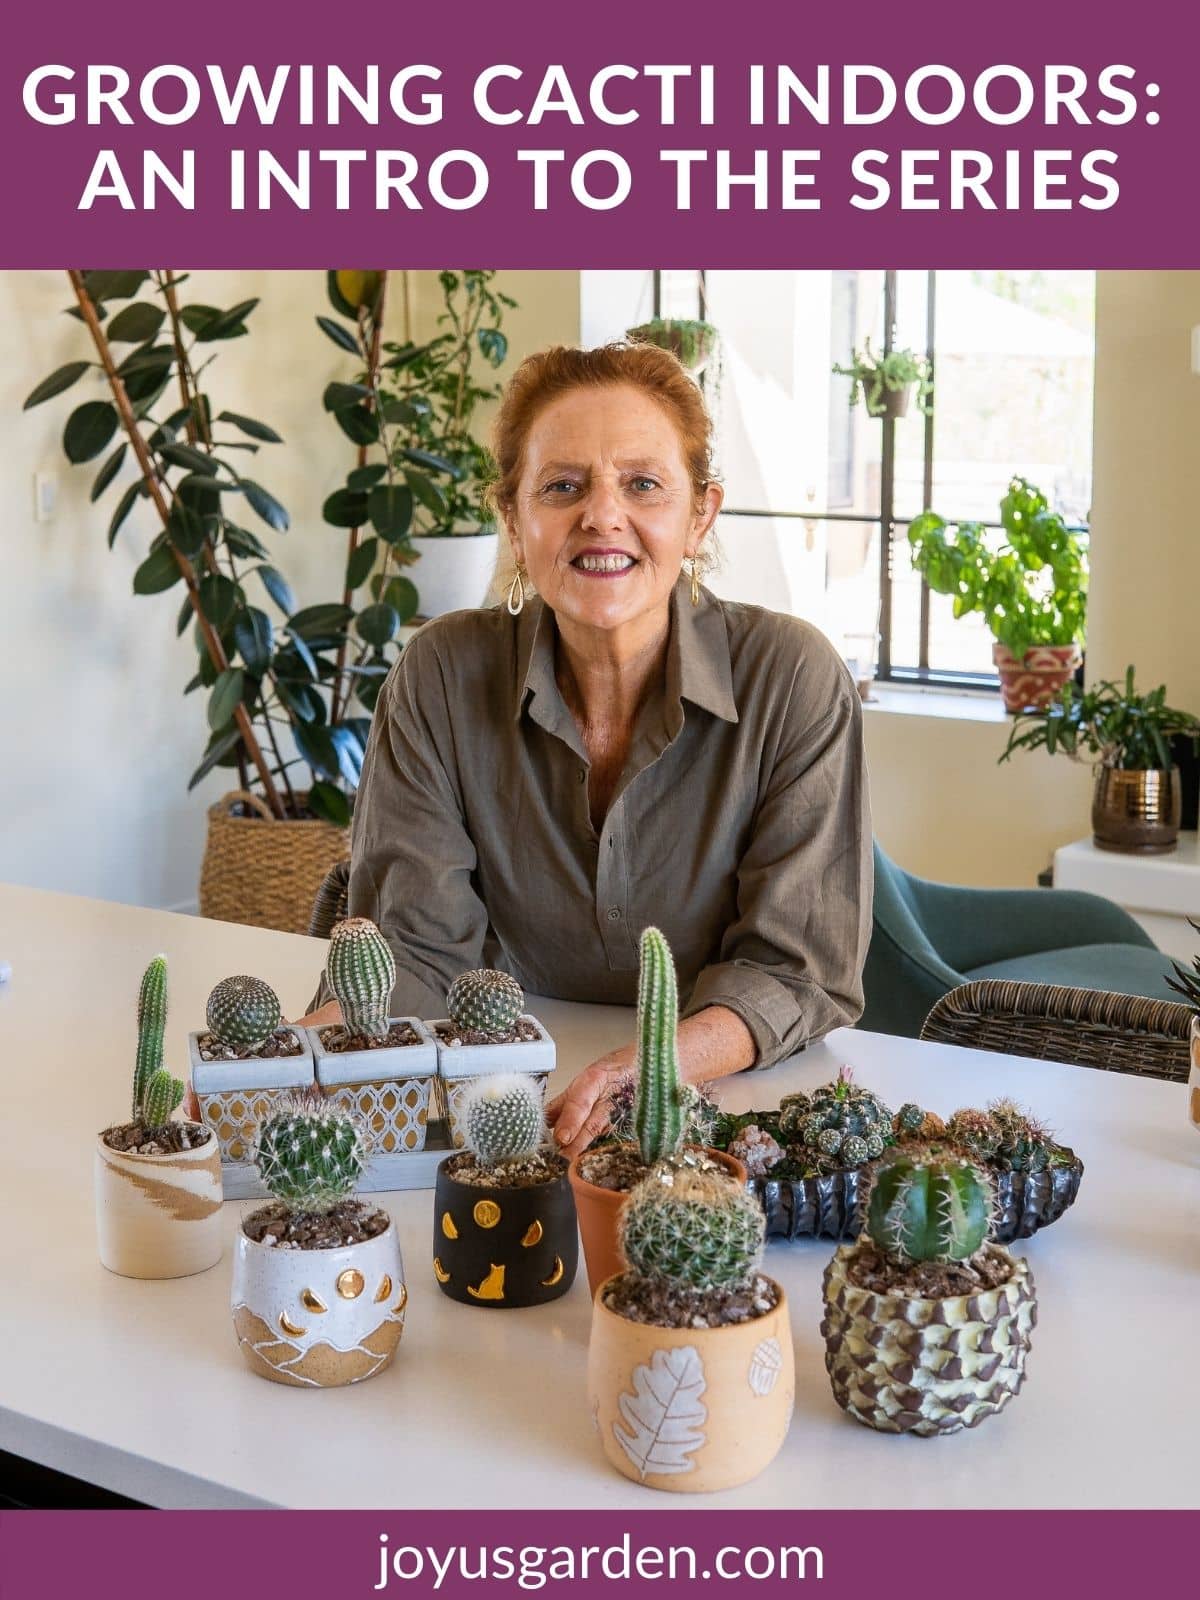 a woman leans on a kitchen island with small cacti in pots surrounding her the text reads growing cacti indoors an intro to the series joyusgarden.com